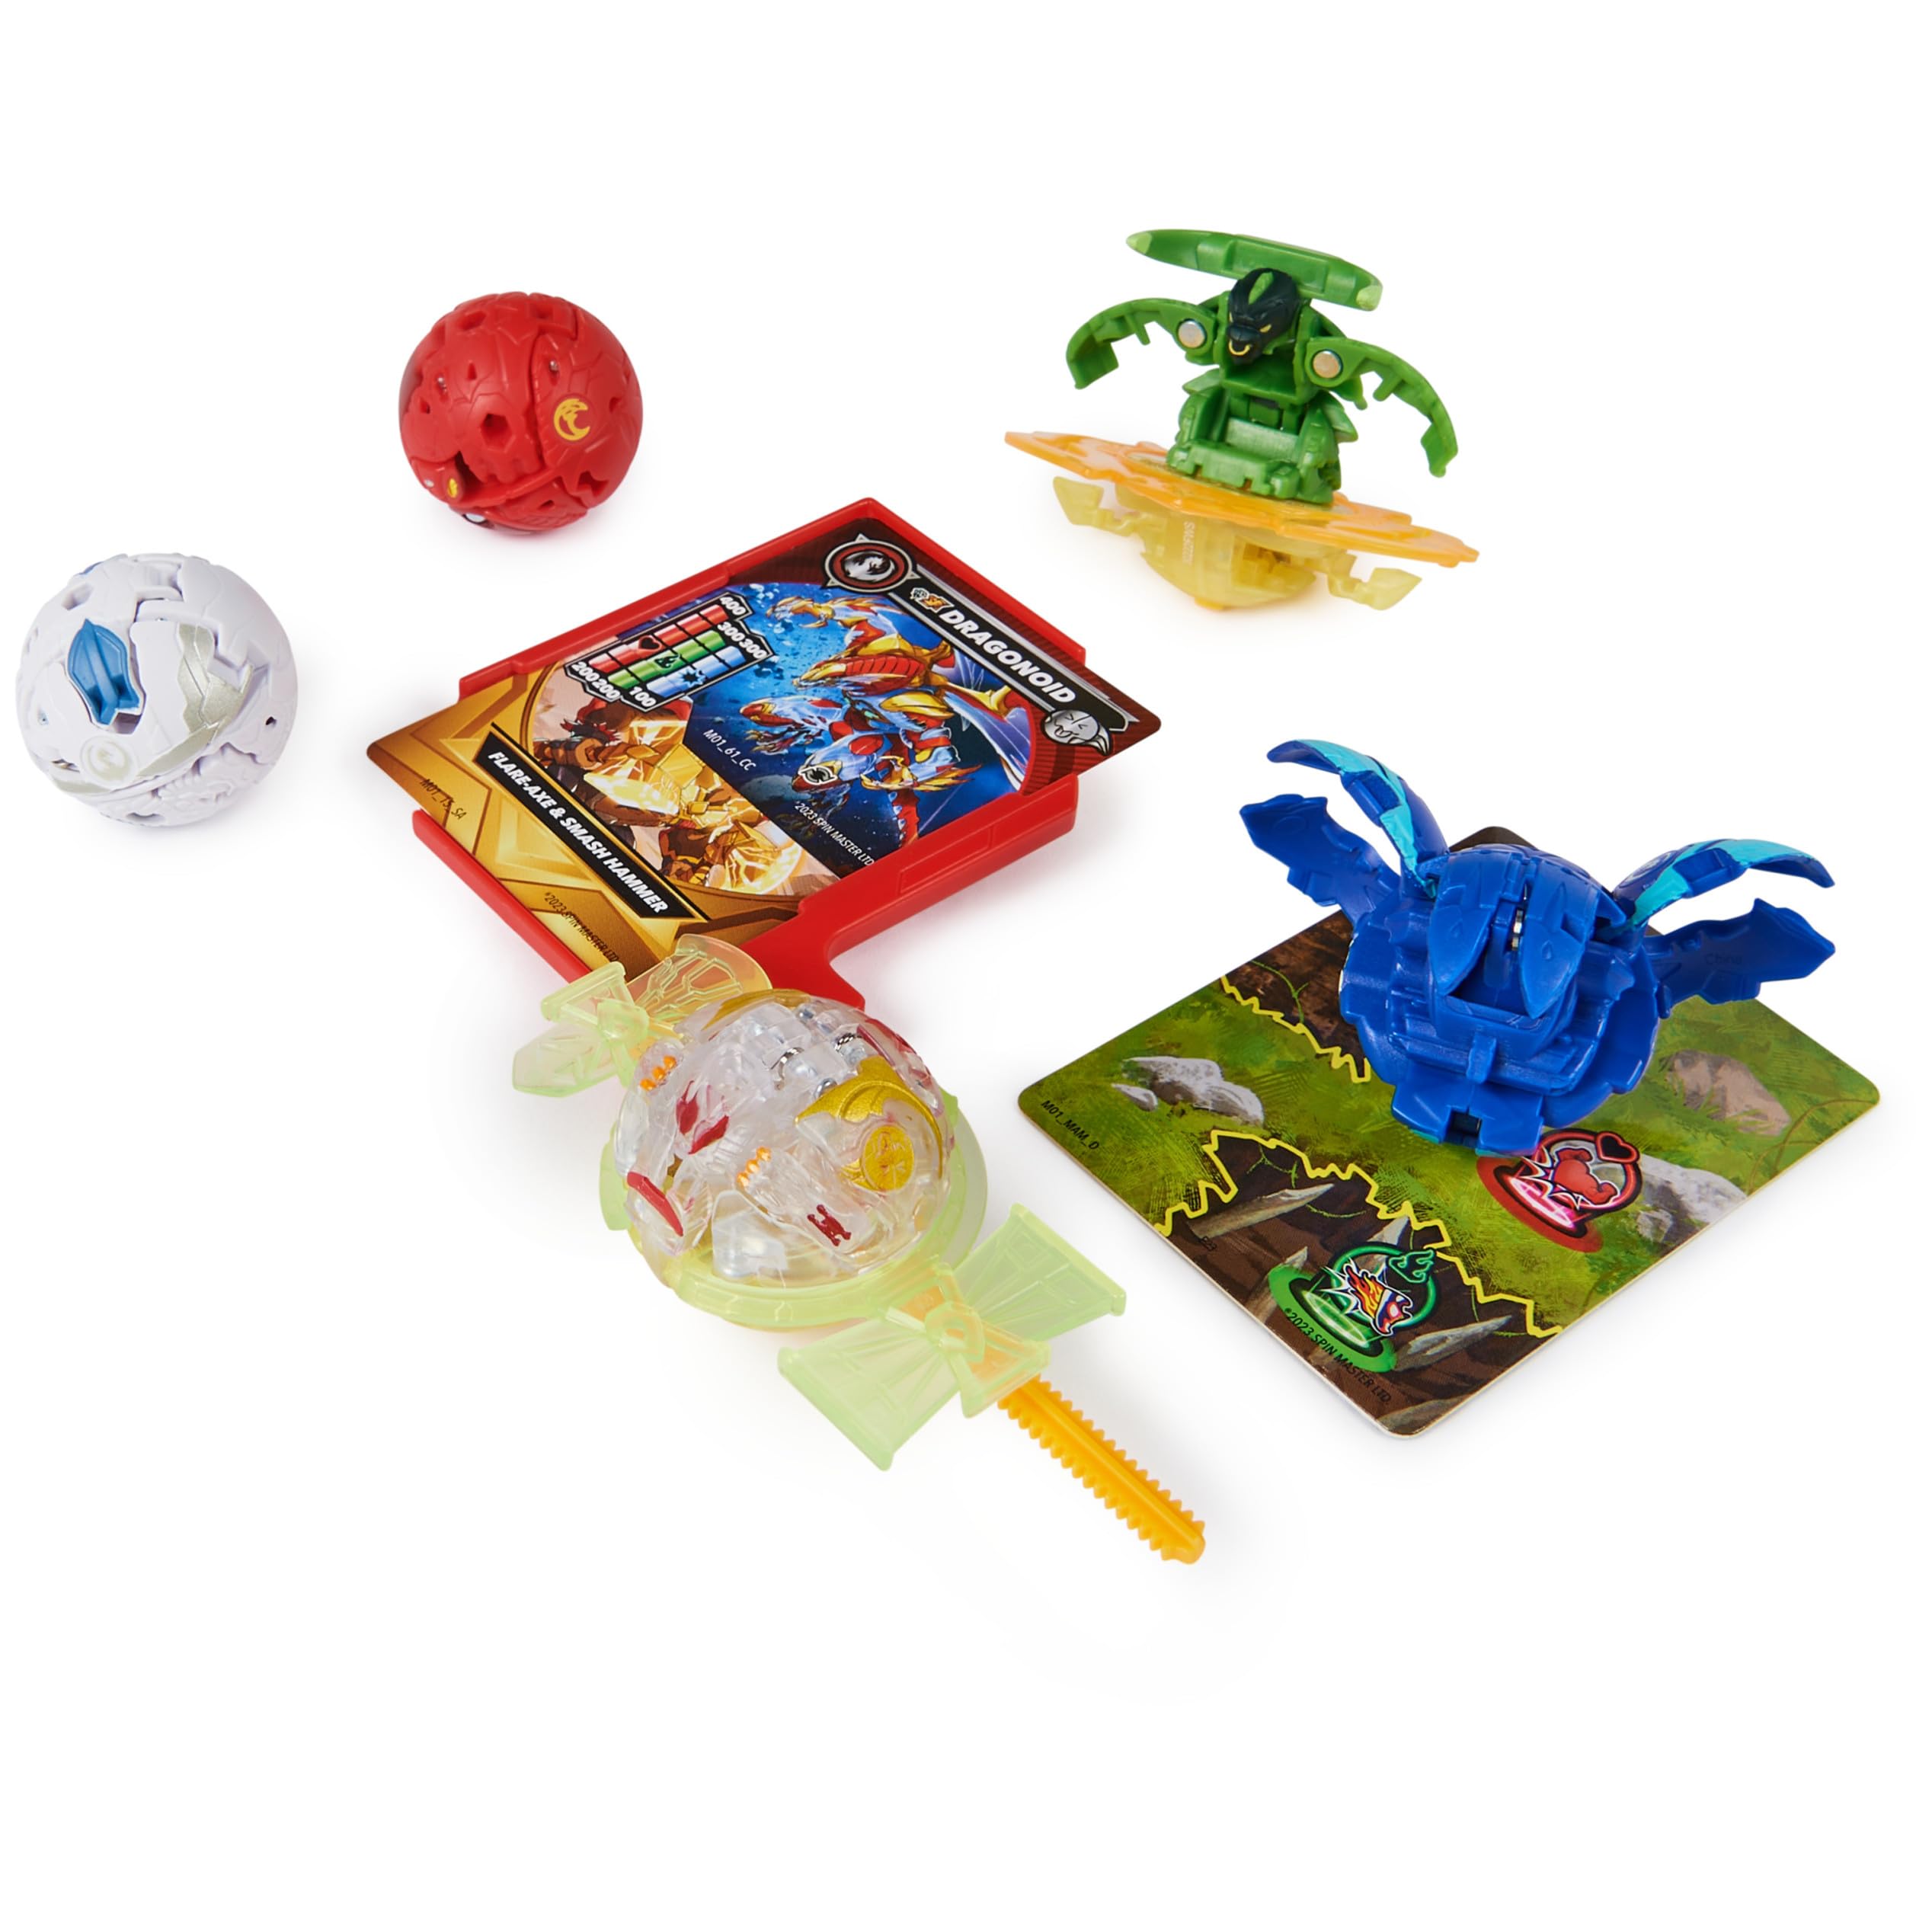 Bakugan Battle 5-Pack, Special Attack Bruiser, Dragonoids, Hammerhead, Nillious; Customizable, Spinning Action Figures, Kids Toys for Boys and Girls 6 and up